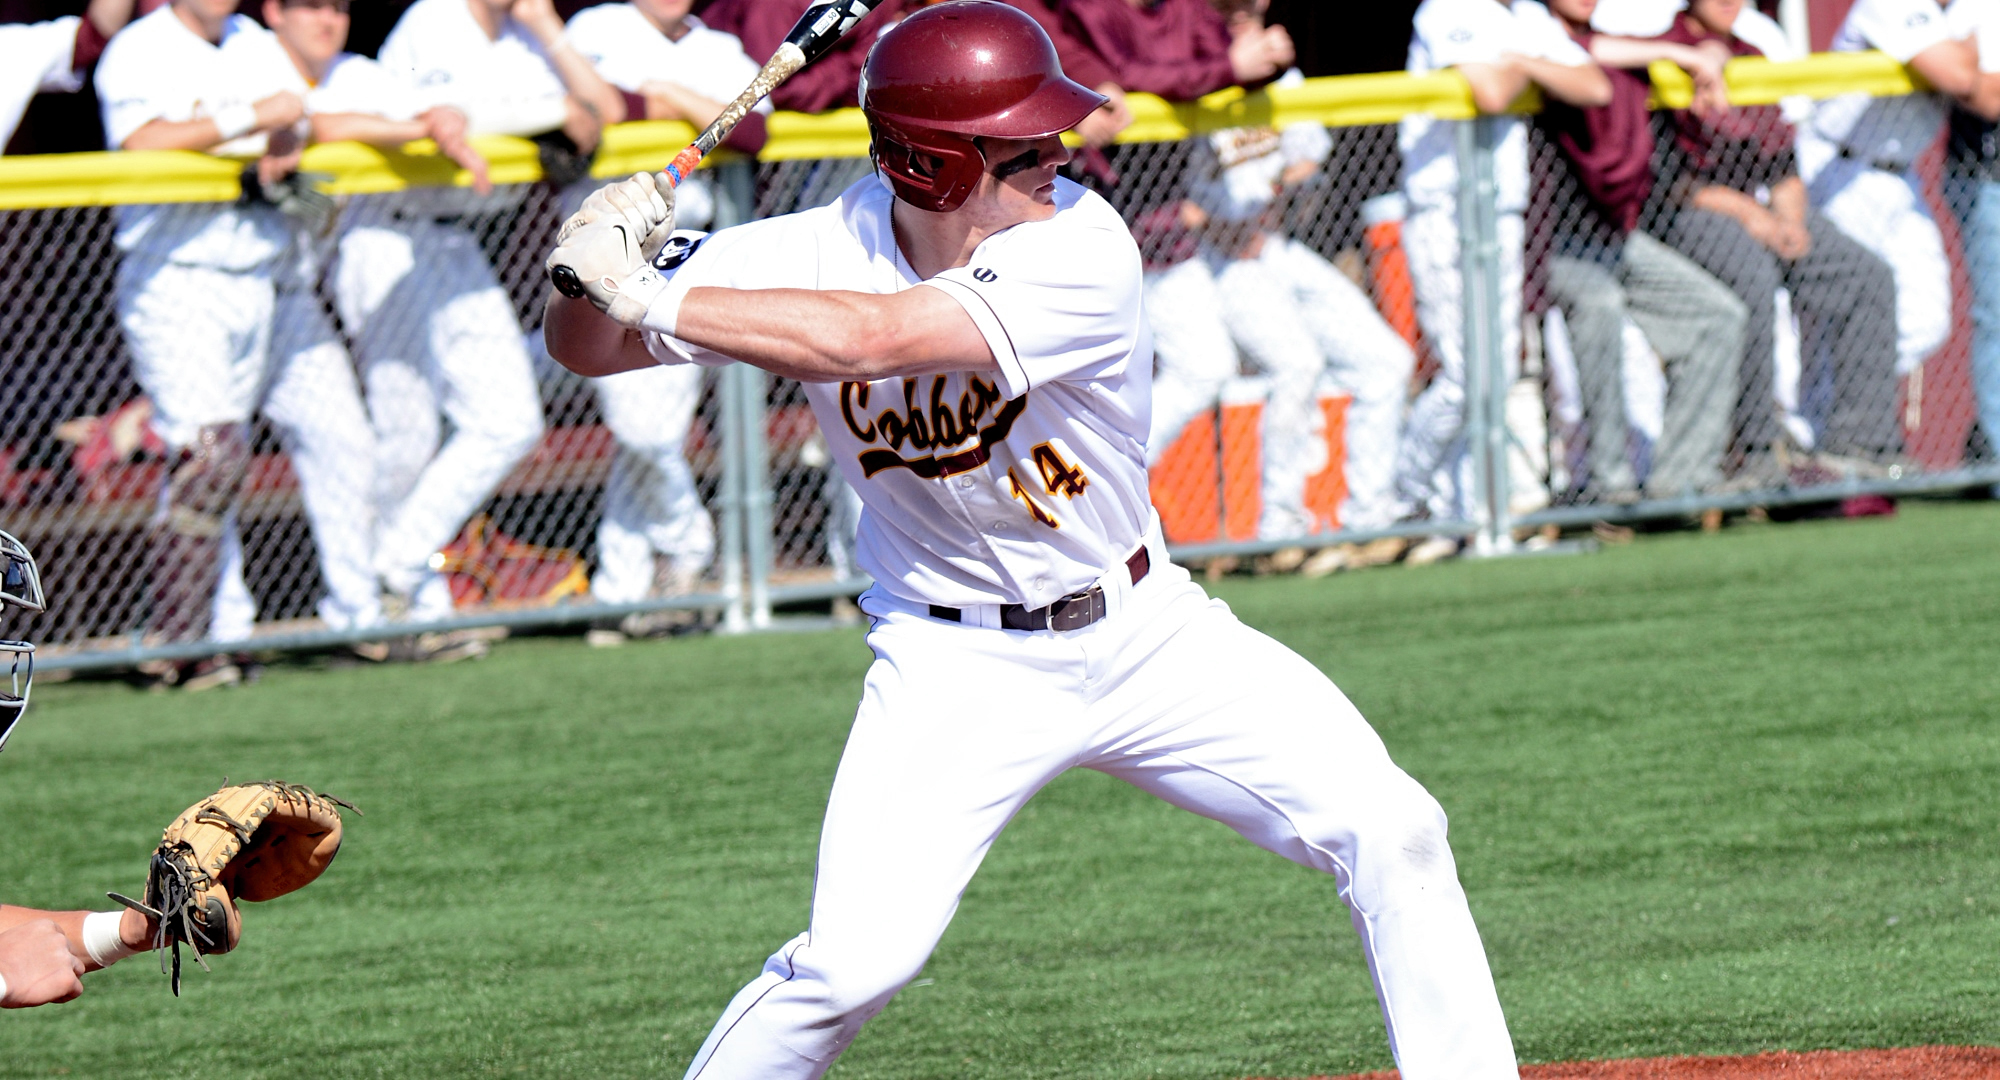 Junior Chad Johnson went 1-for-3 and drove in one of the Cobbers' four runs in the team's game against Augustana (Ill.).